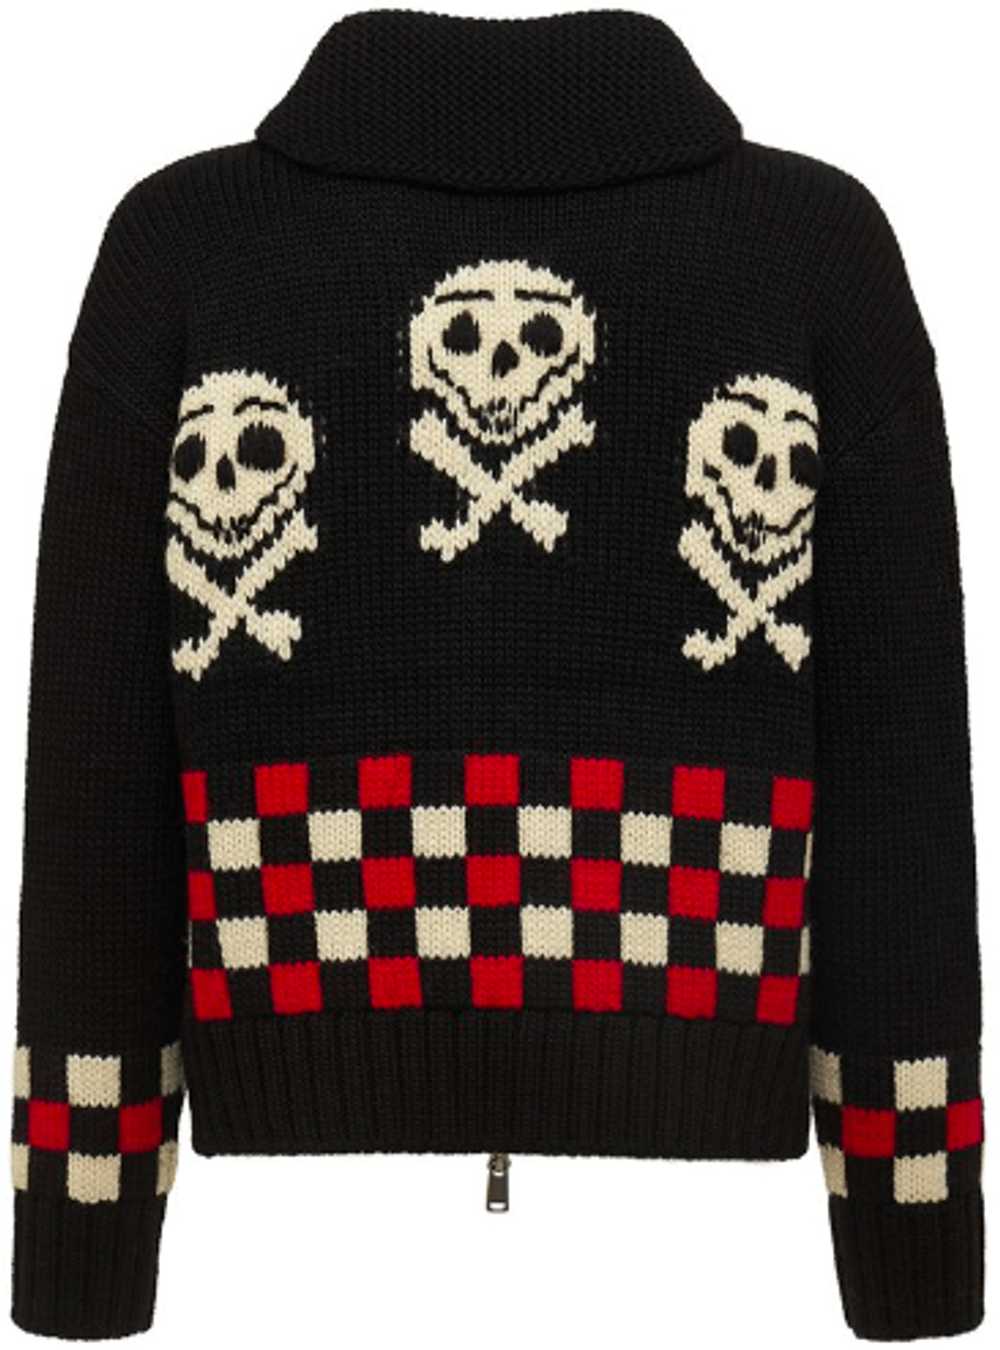 Andersson Bell Knitted Sweater - final drop, open… - image 3